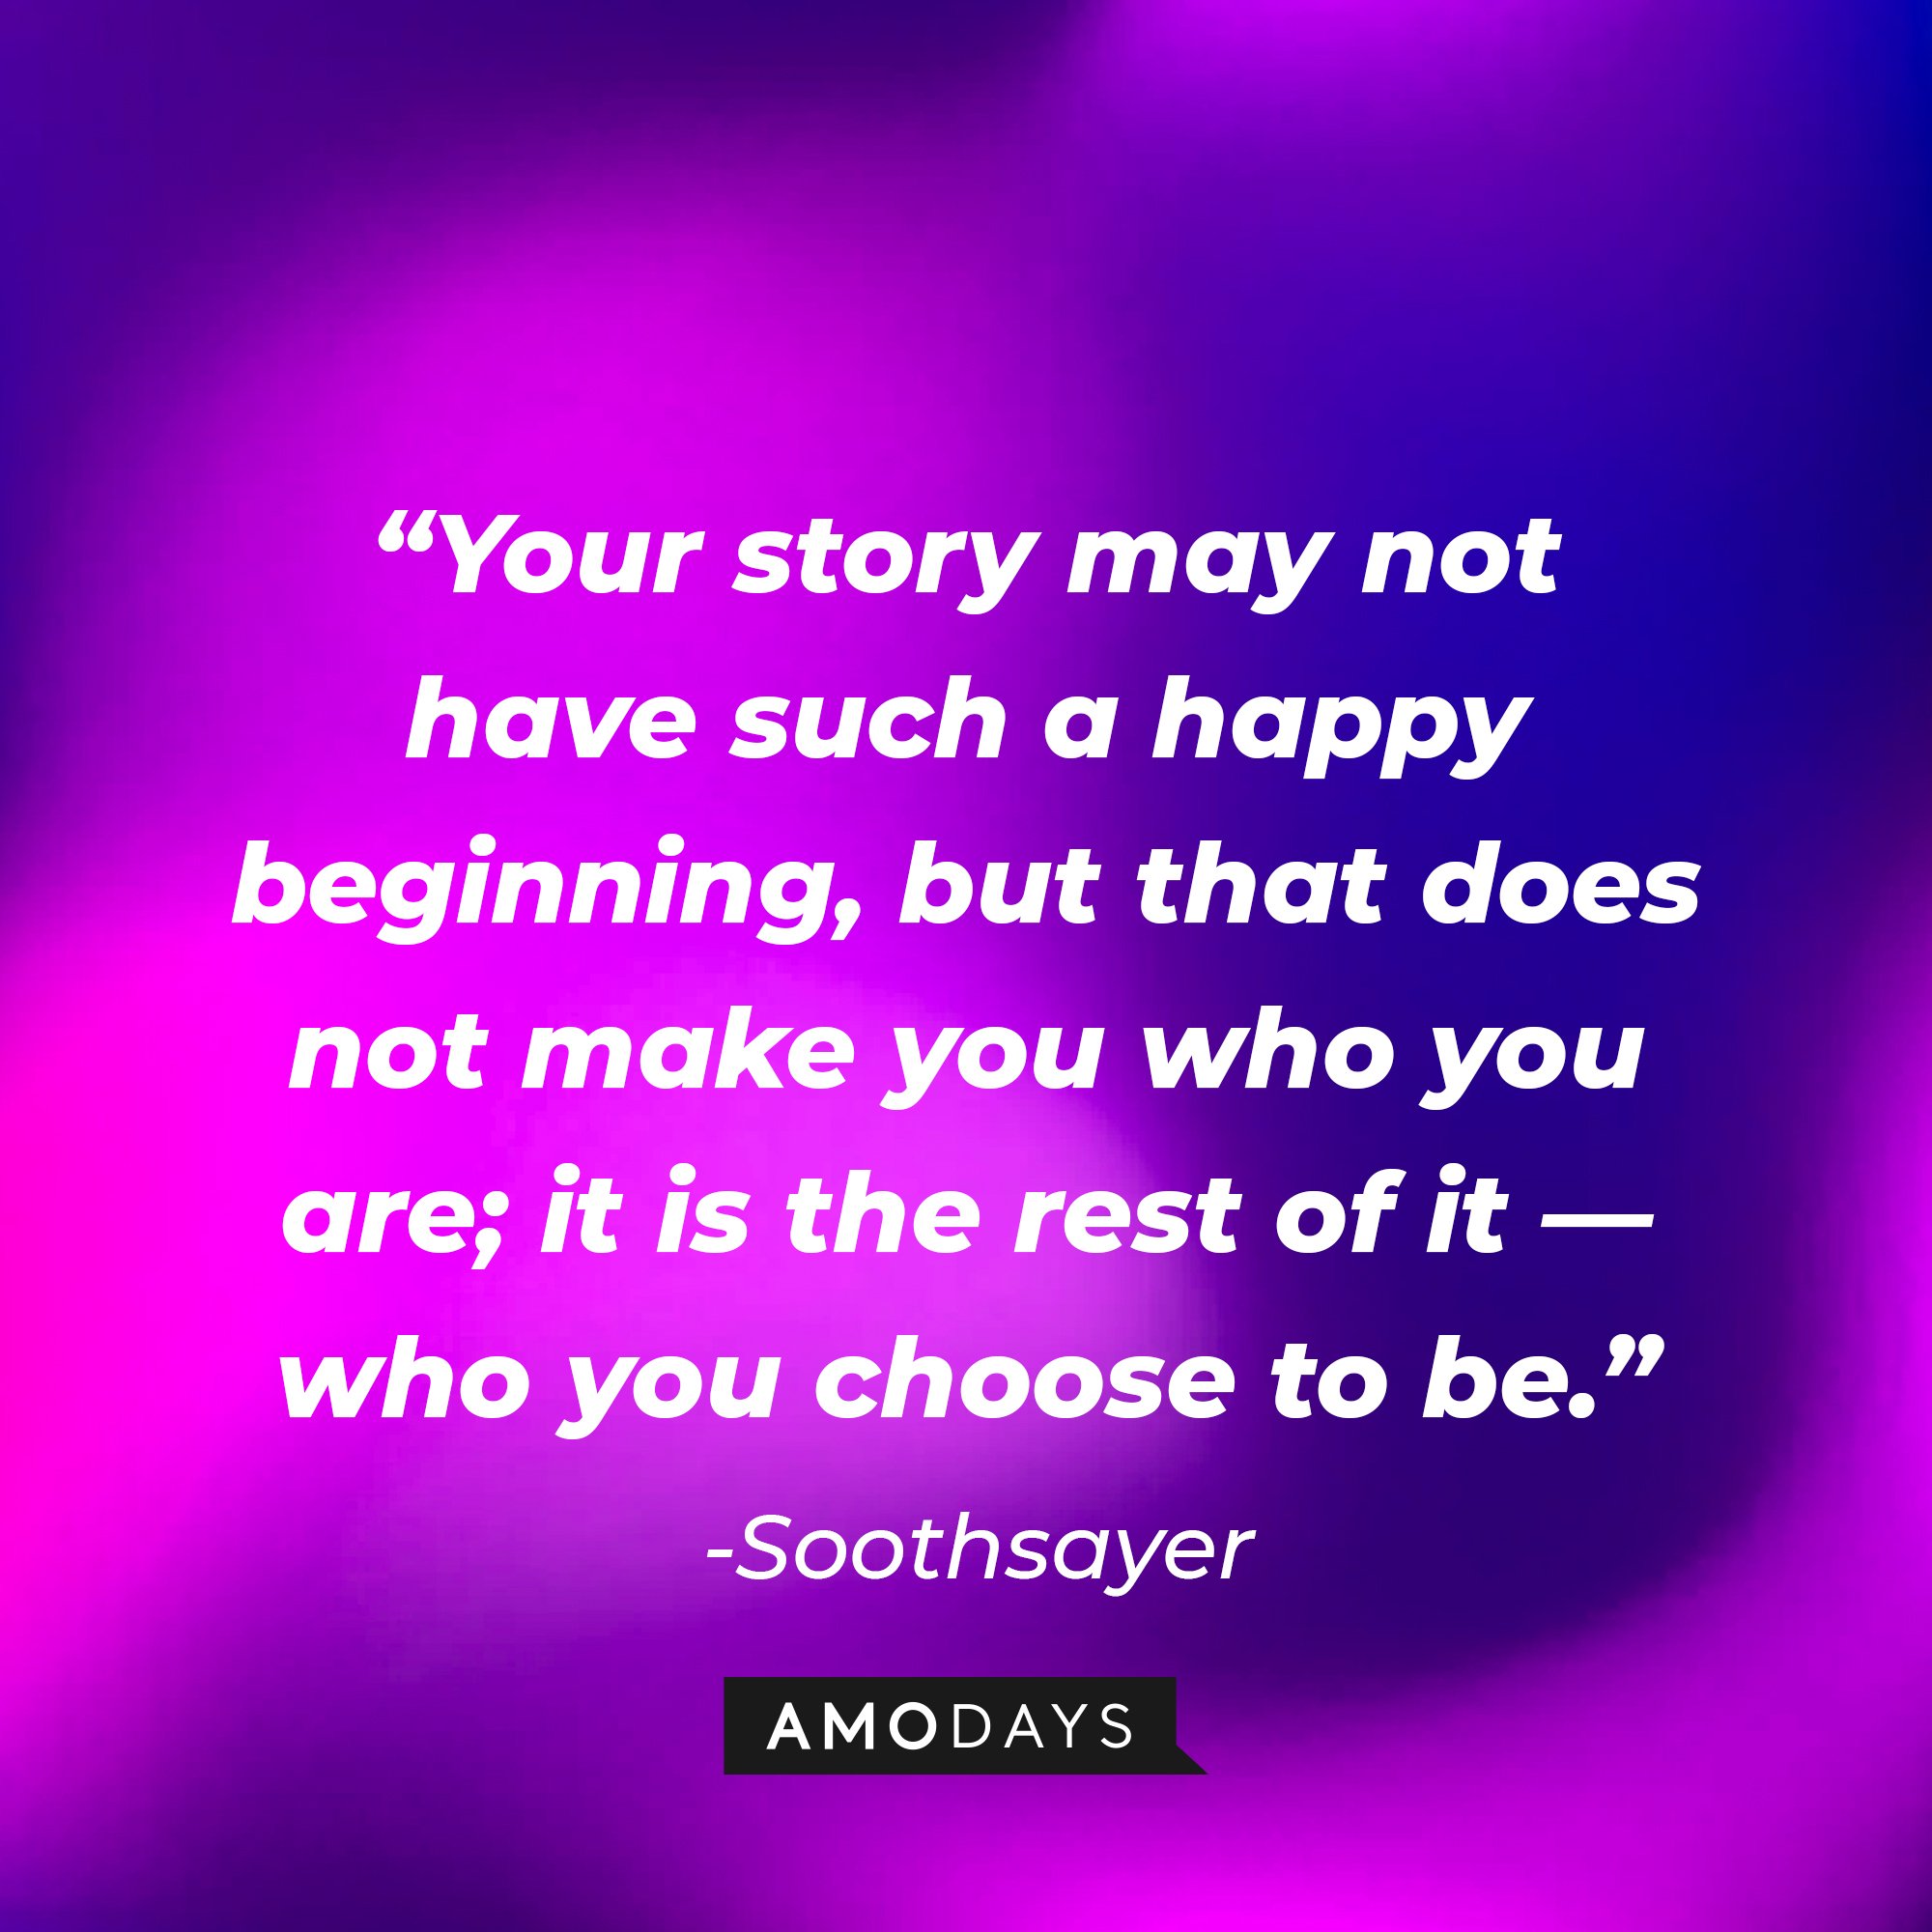 Soothsayer's quote: “Your story may not have such a happy beginning, but that does not make you who you are; it is the rest of it — who you choose to be.” | Image: AmoDays